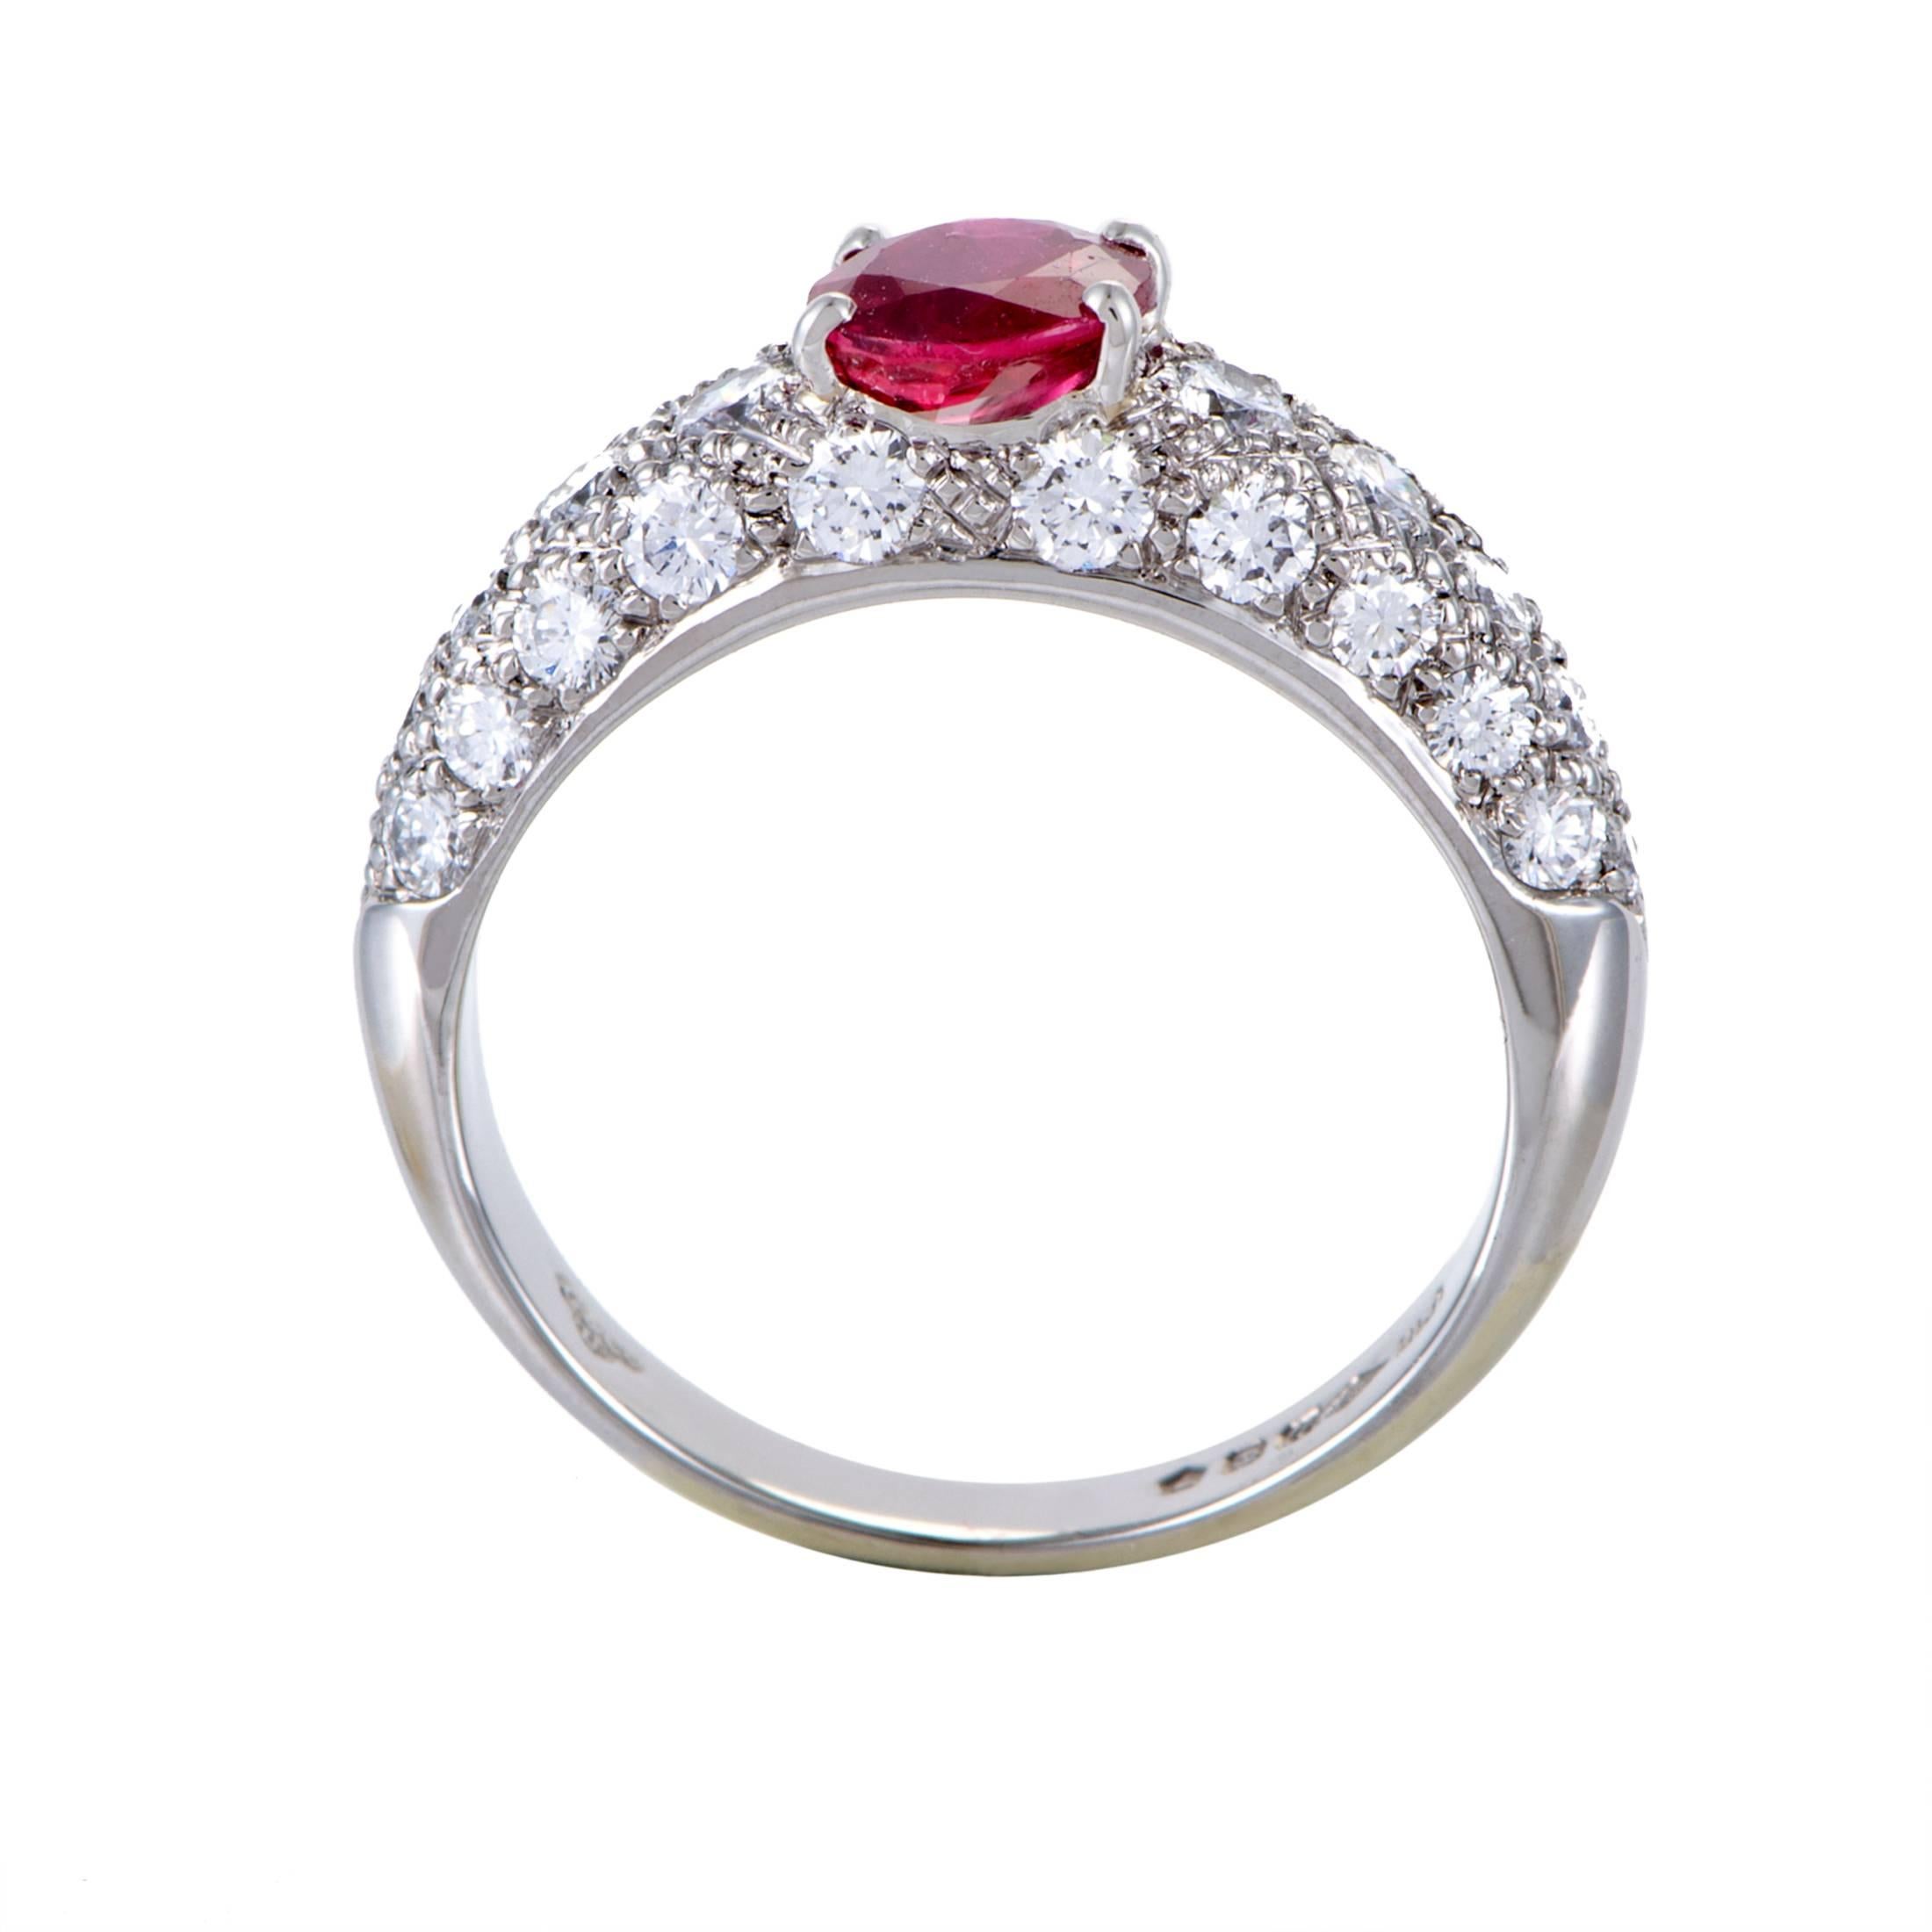 Leading up to the gorgeous ruby weighing approximately 0.80ct, a fascinating arrangement of resplendent diamonds amounting approximately 0.90ct graces this magnificent platinum ring from Garrard, presenting a spellbinding sight.
Ring Size: 5.0